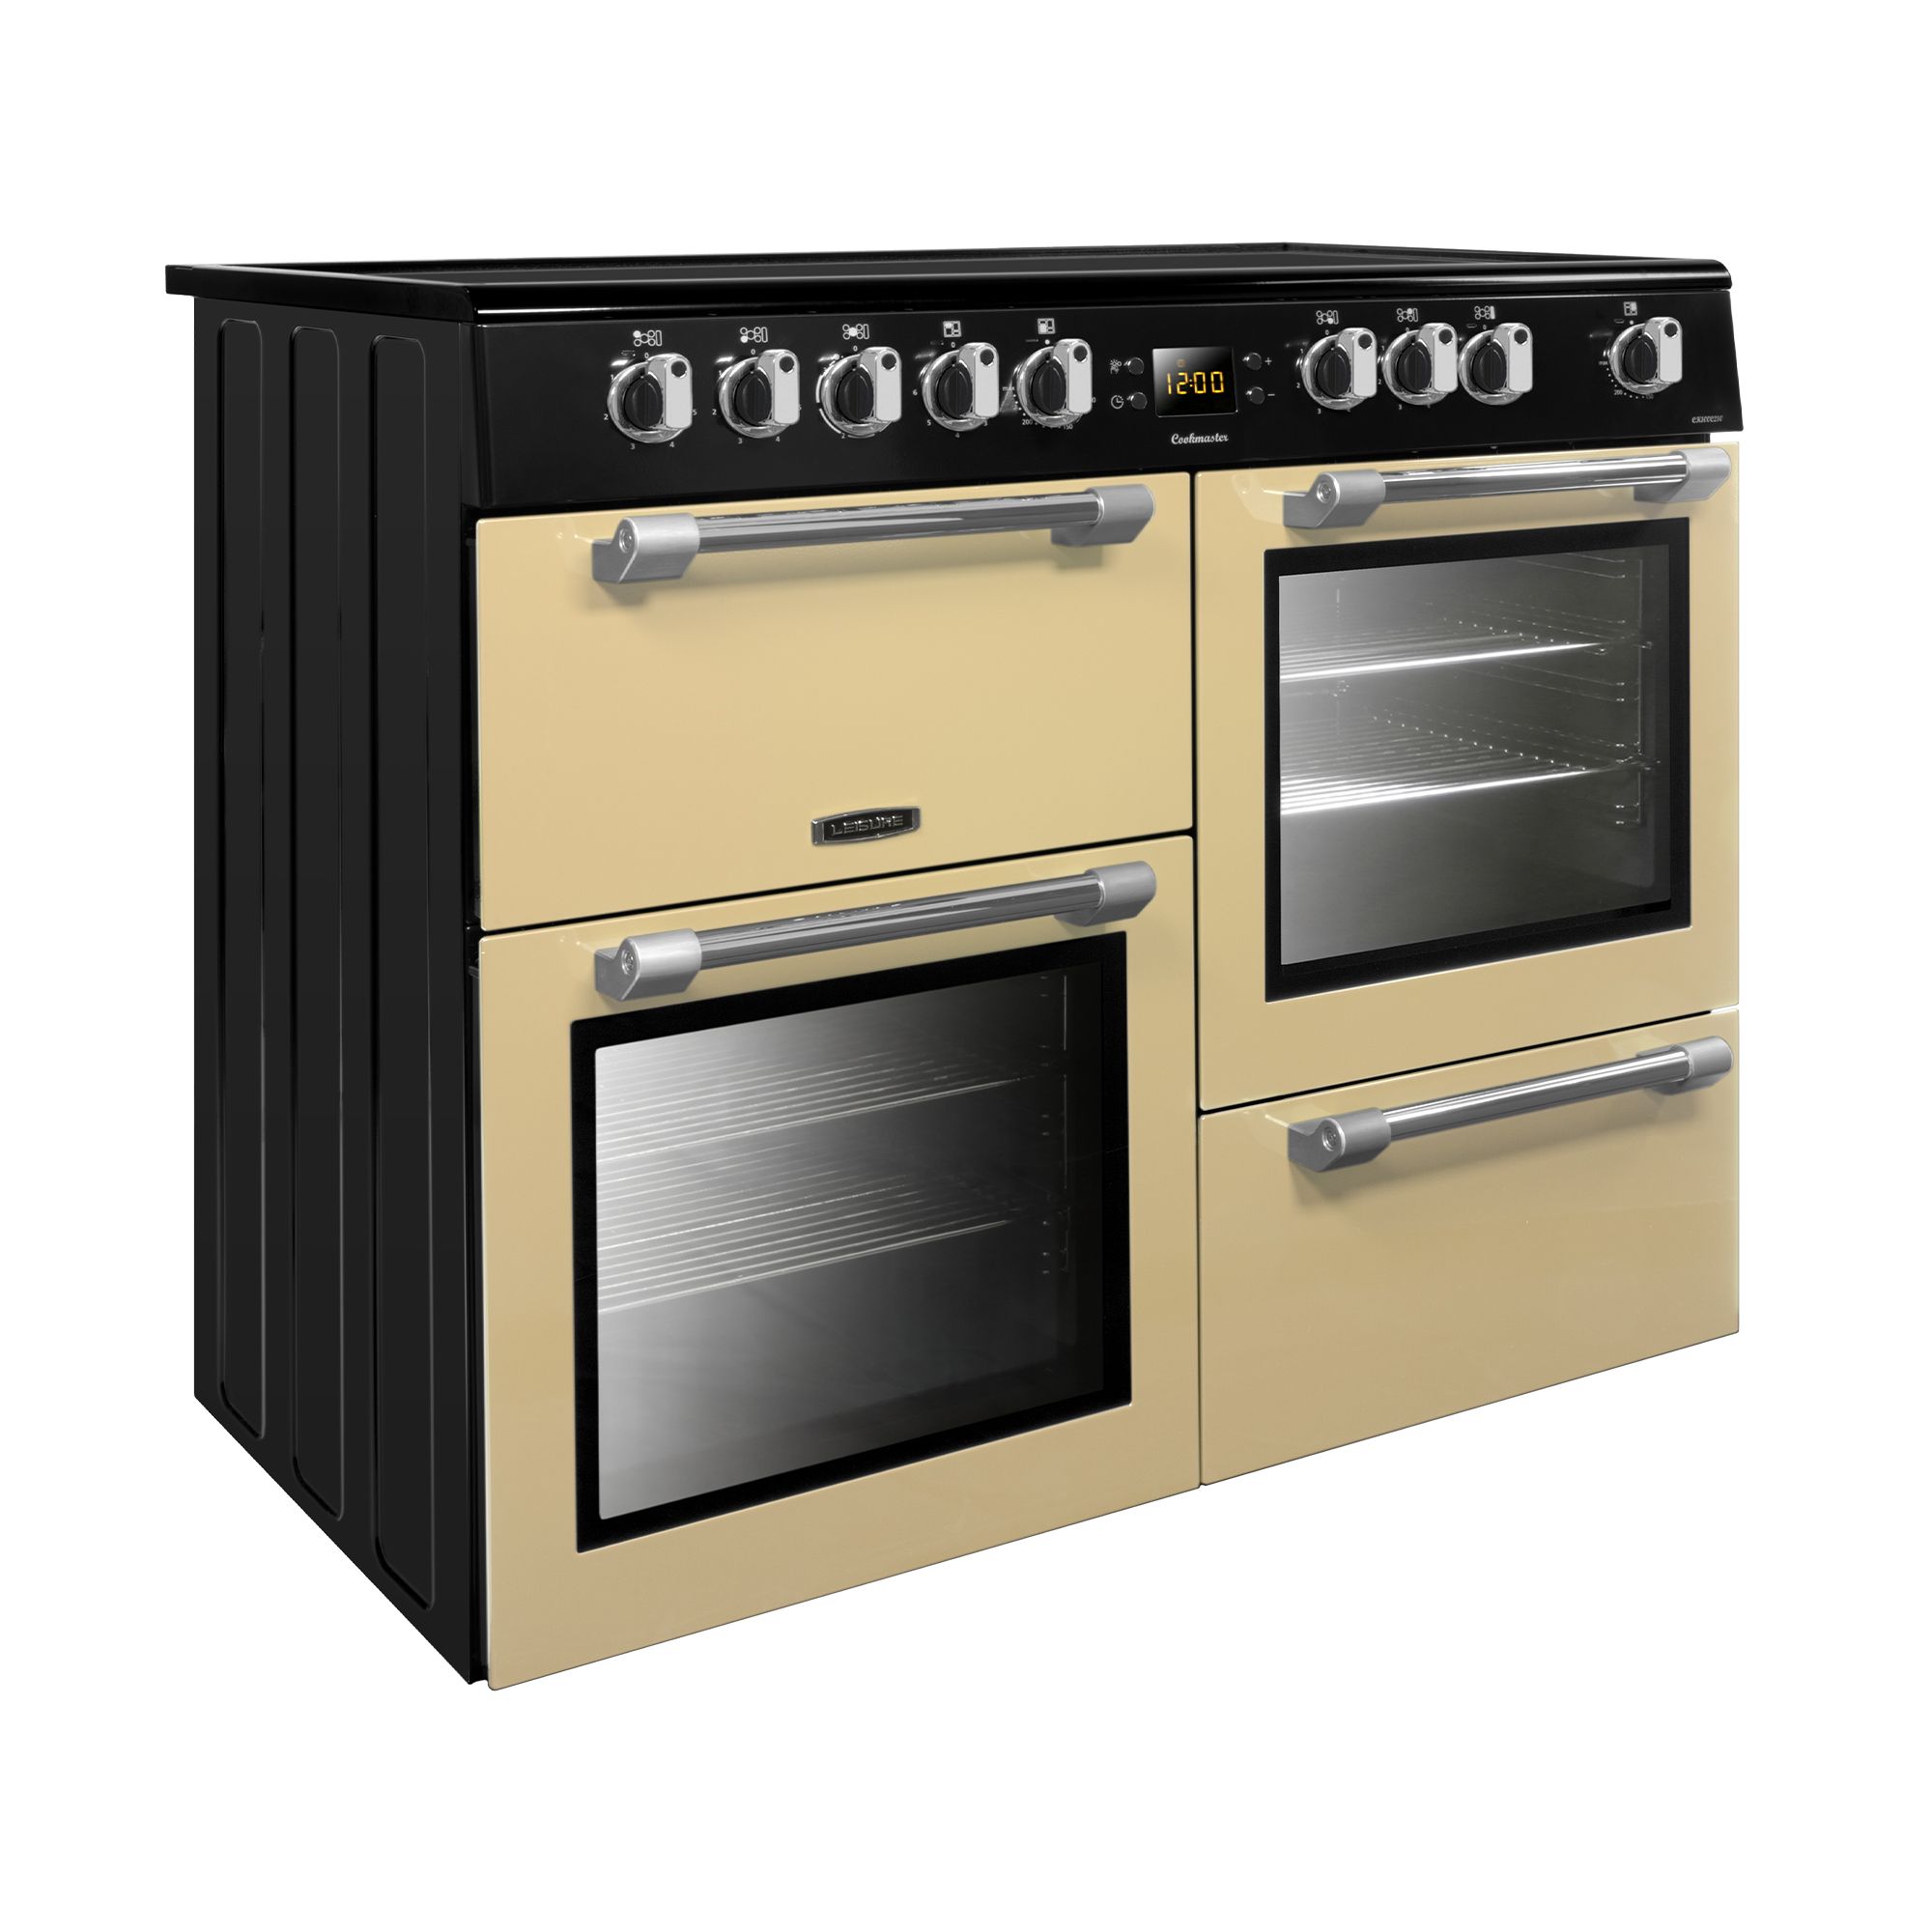 Leisure CK100C210C Freestanding Electric Range cooker with Electric Hob